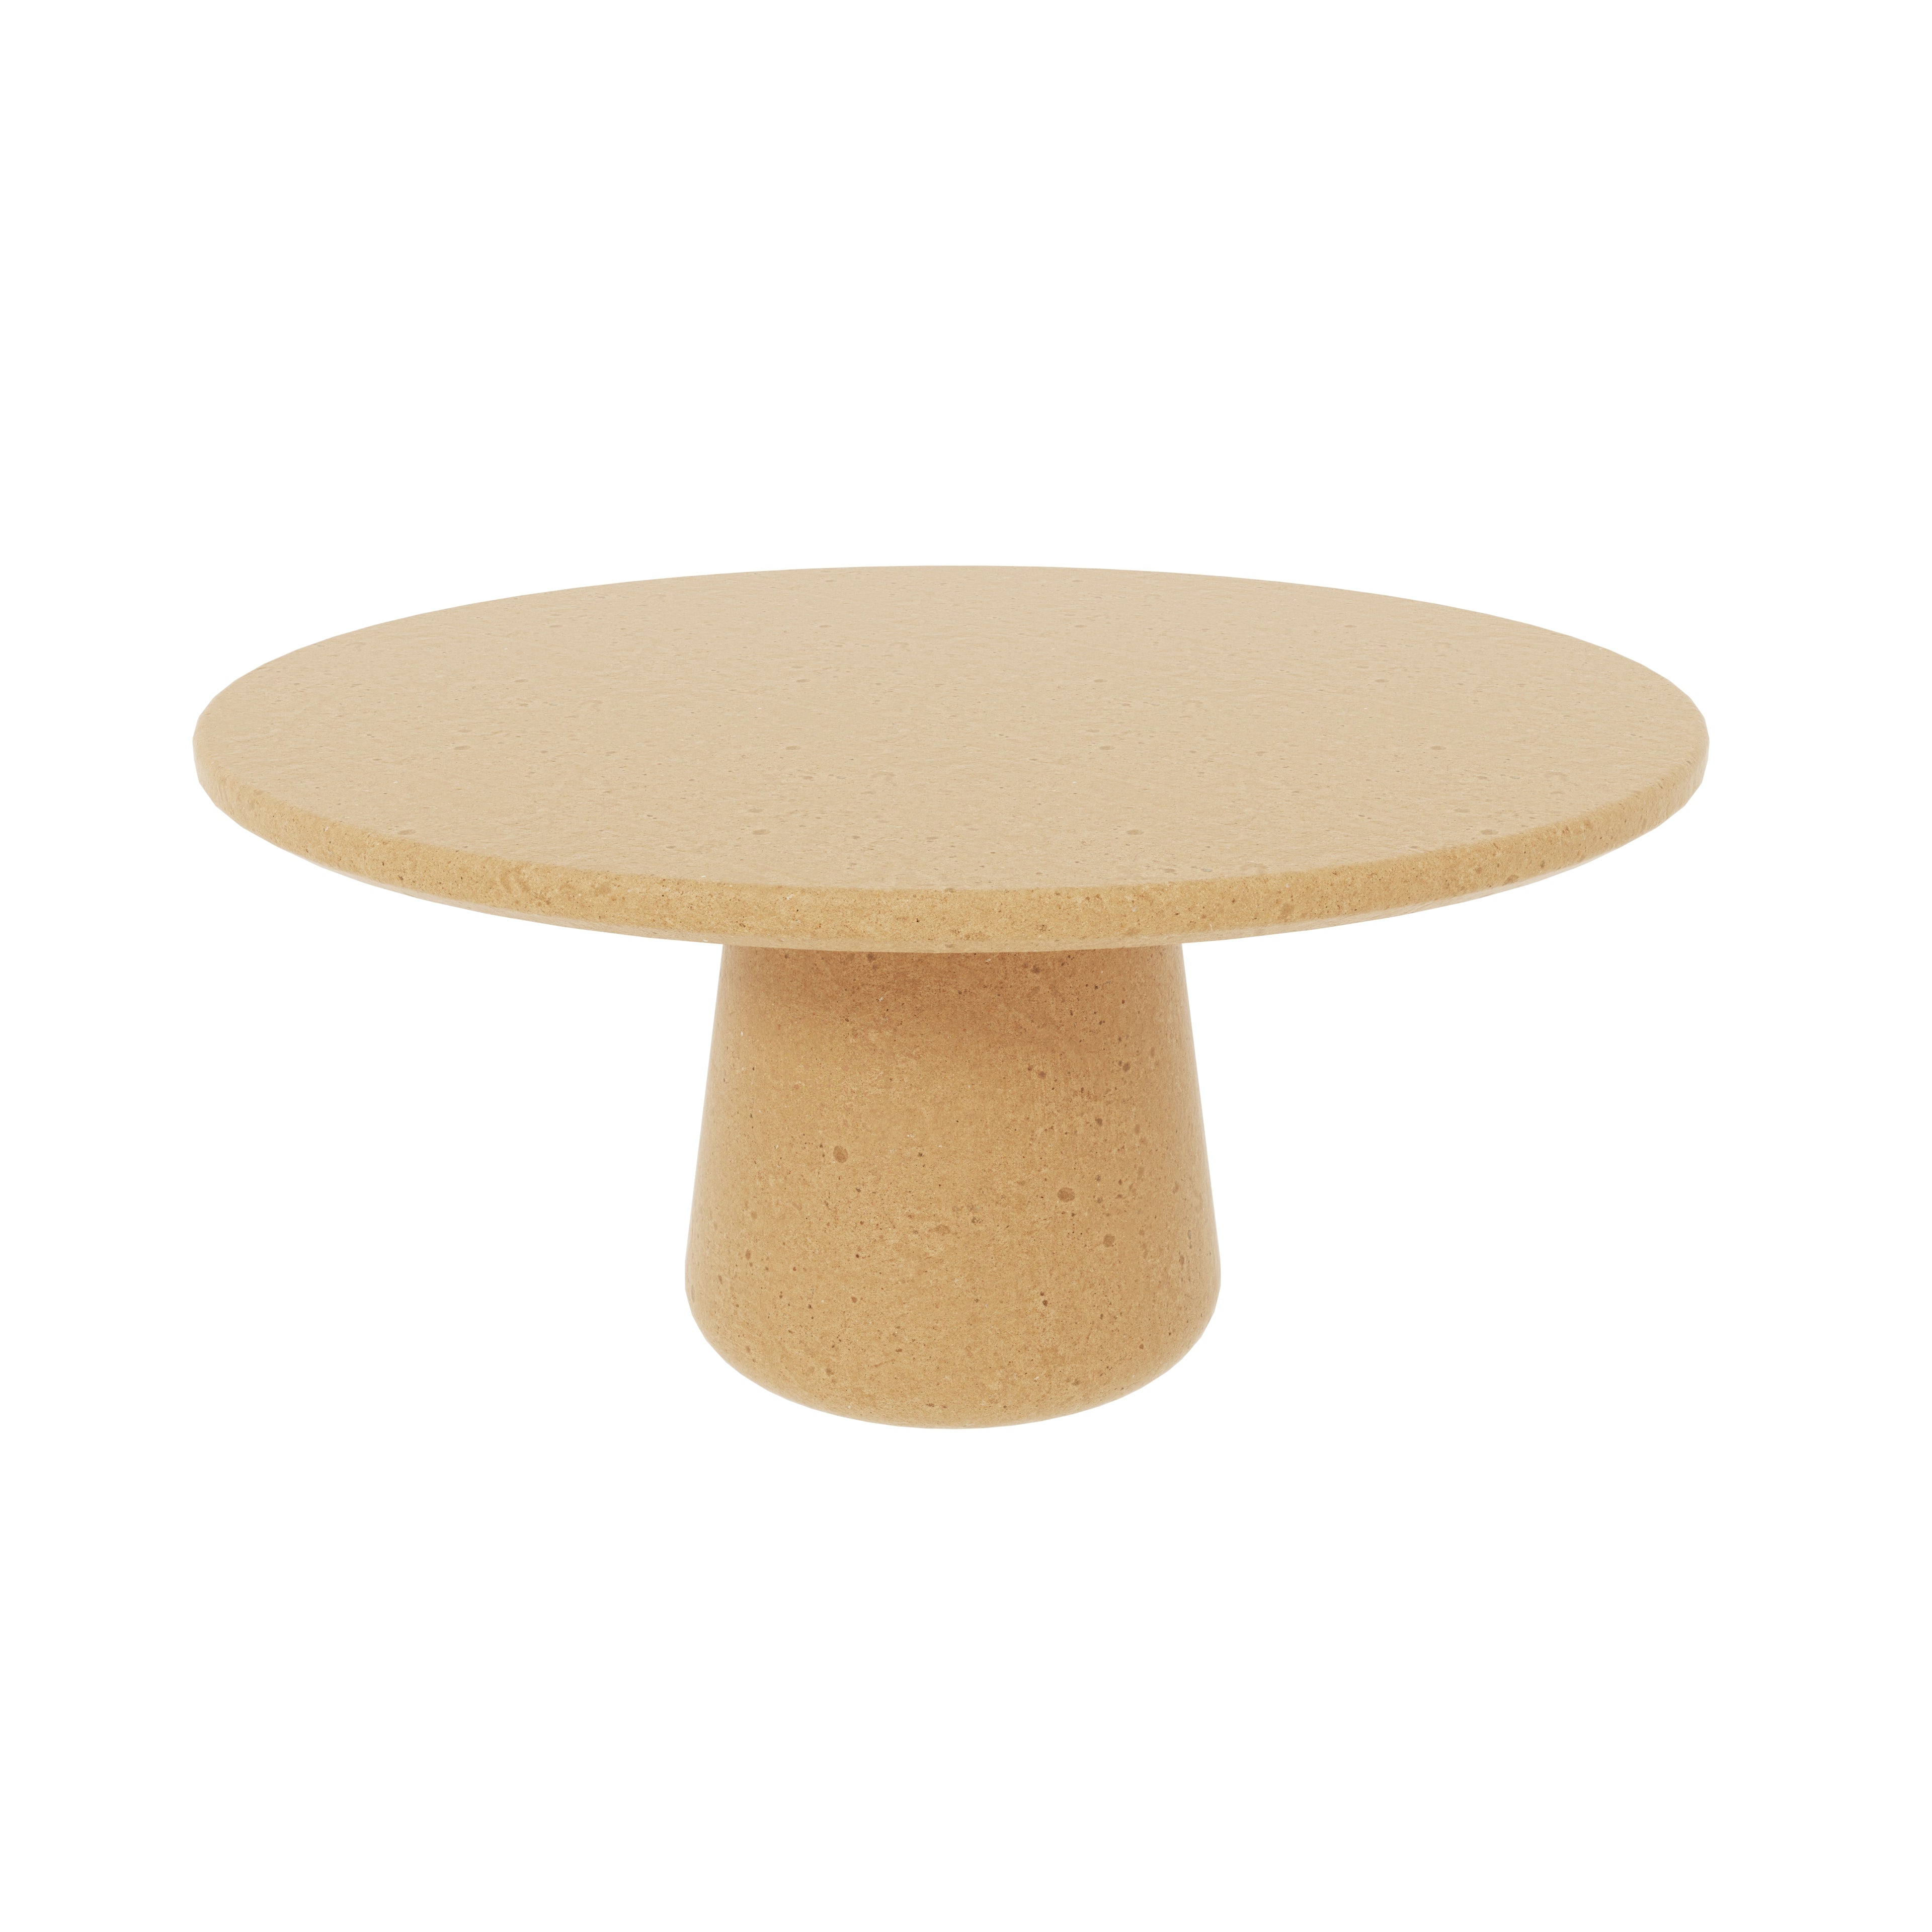 HELSINKI ROUND CONCRETE DINING TABLE